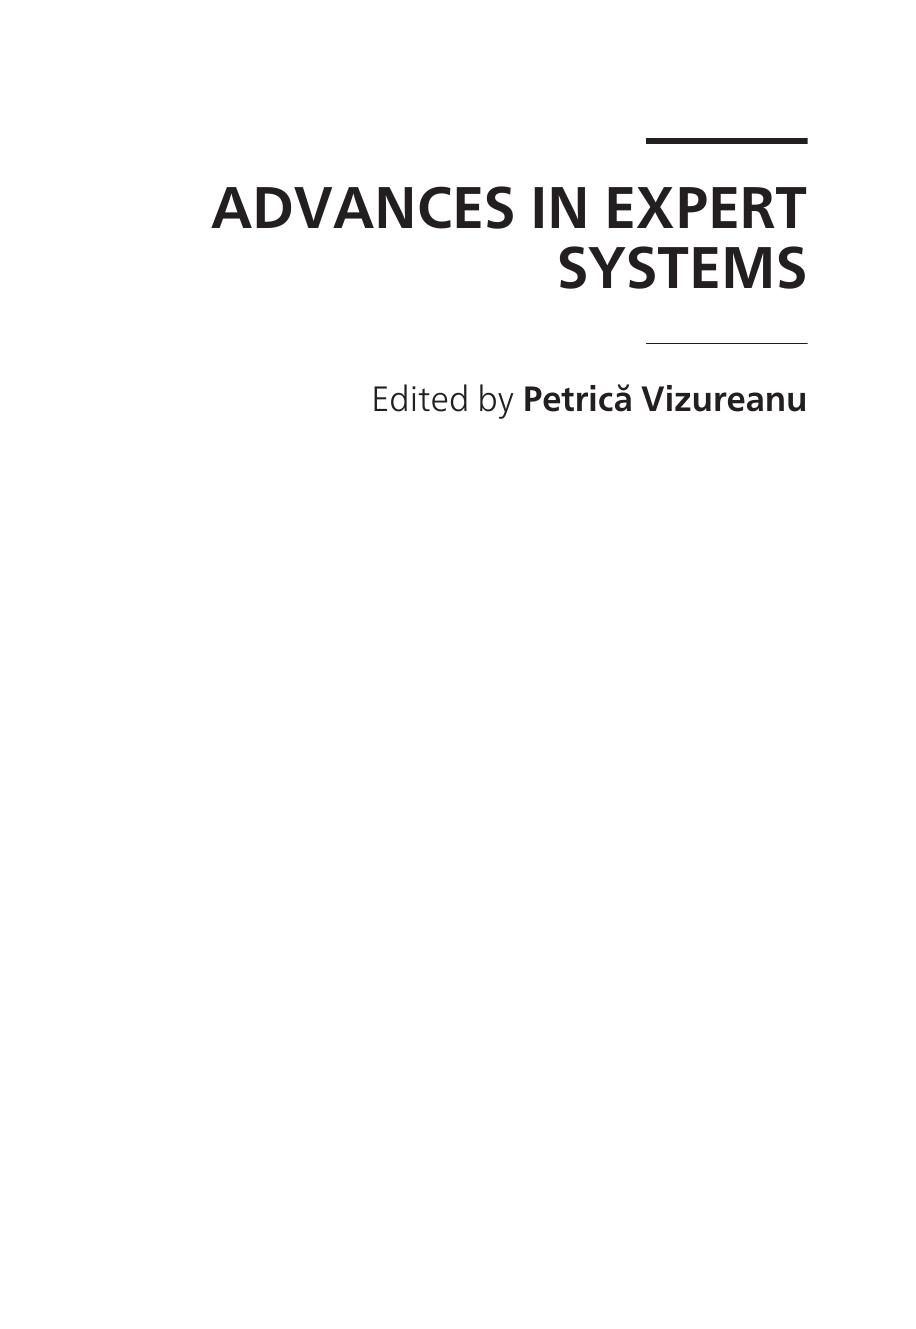 Advances in Expert Systems 2012.pdf